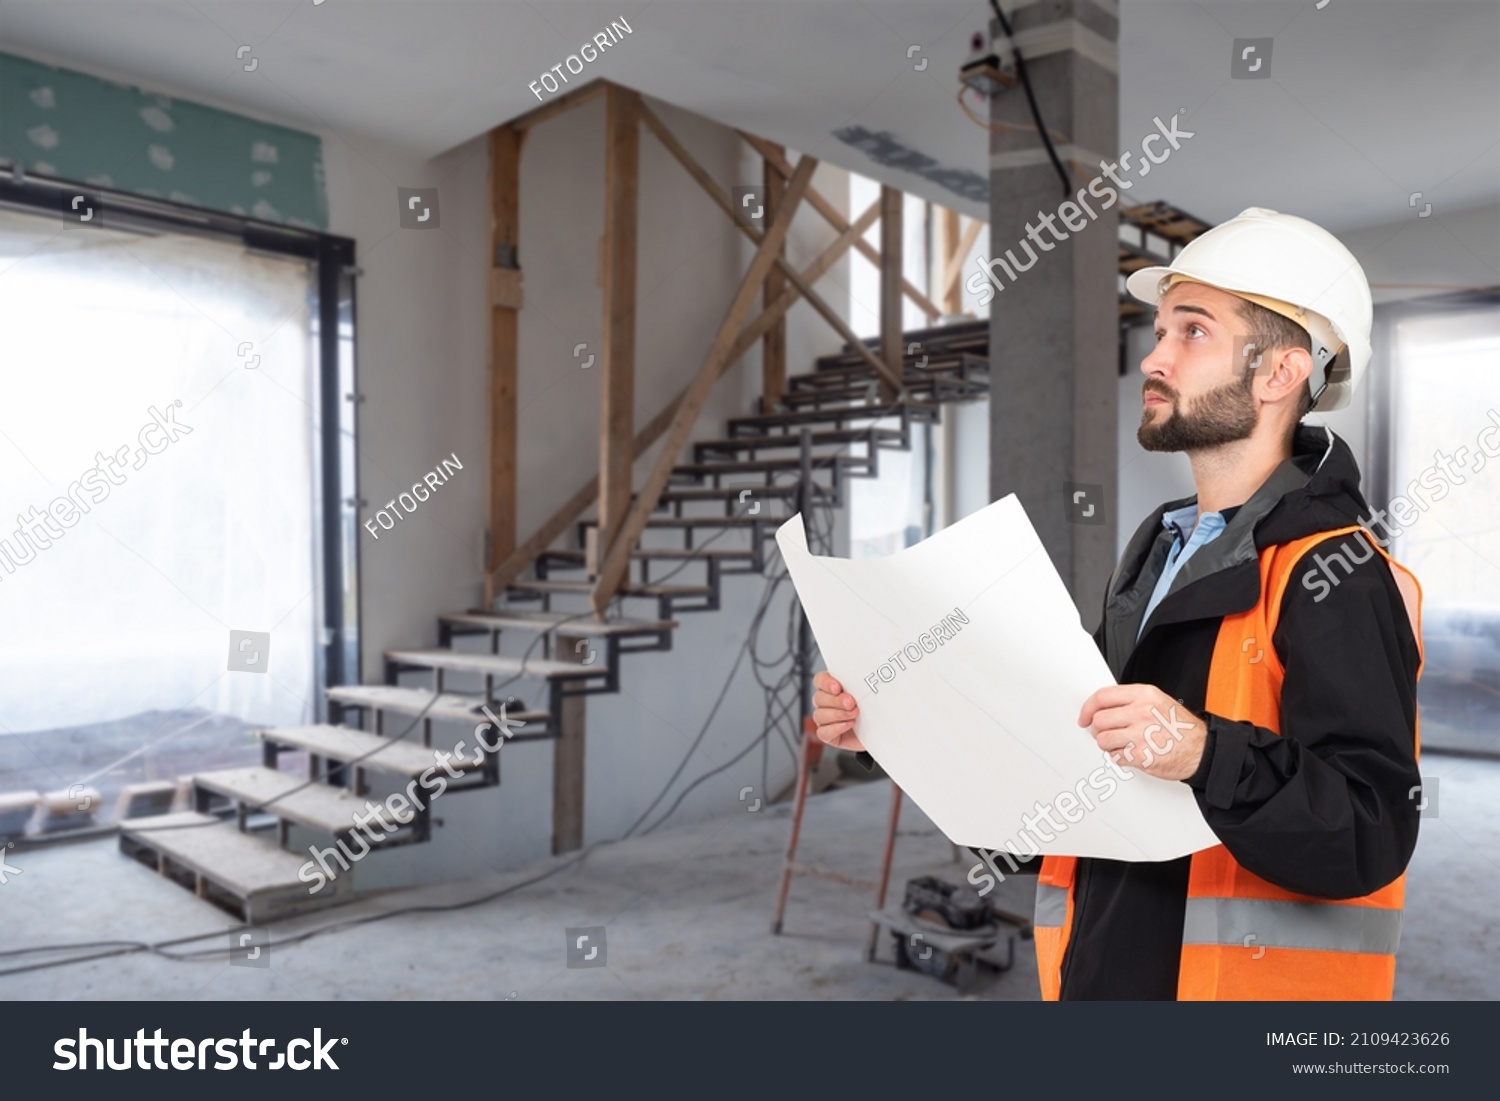 An architect with drawings in his hands. Man supervises construction work. Foreman in house under construction. A construction engineer in a hard hat and an orange vest. Builder with drawings. #2109423626